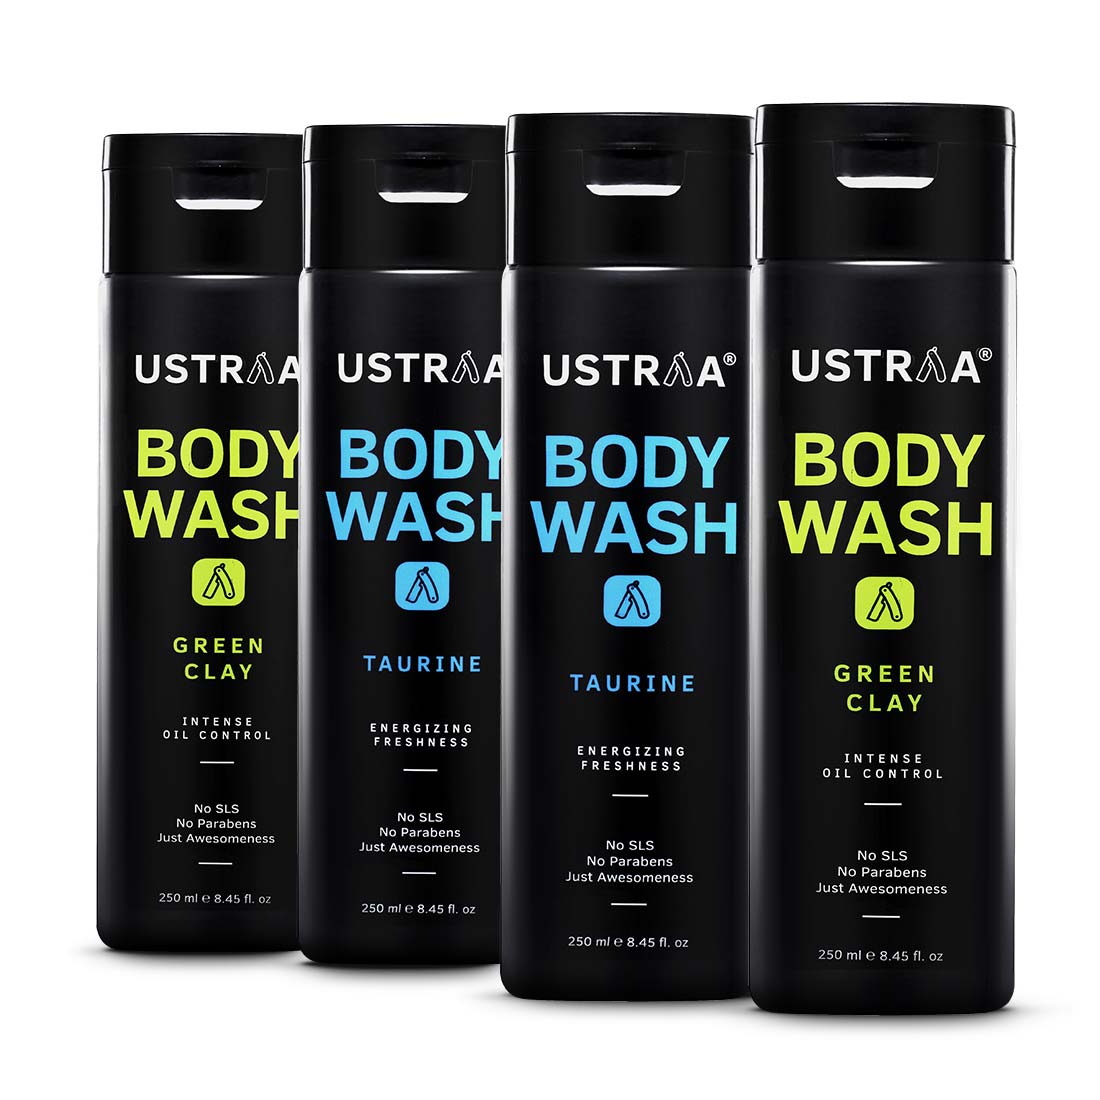 Ustraa Body Wash For Men – Green Clay & Taurine – Set of 4